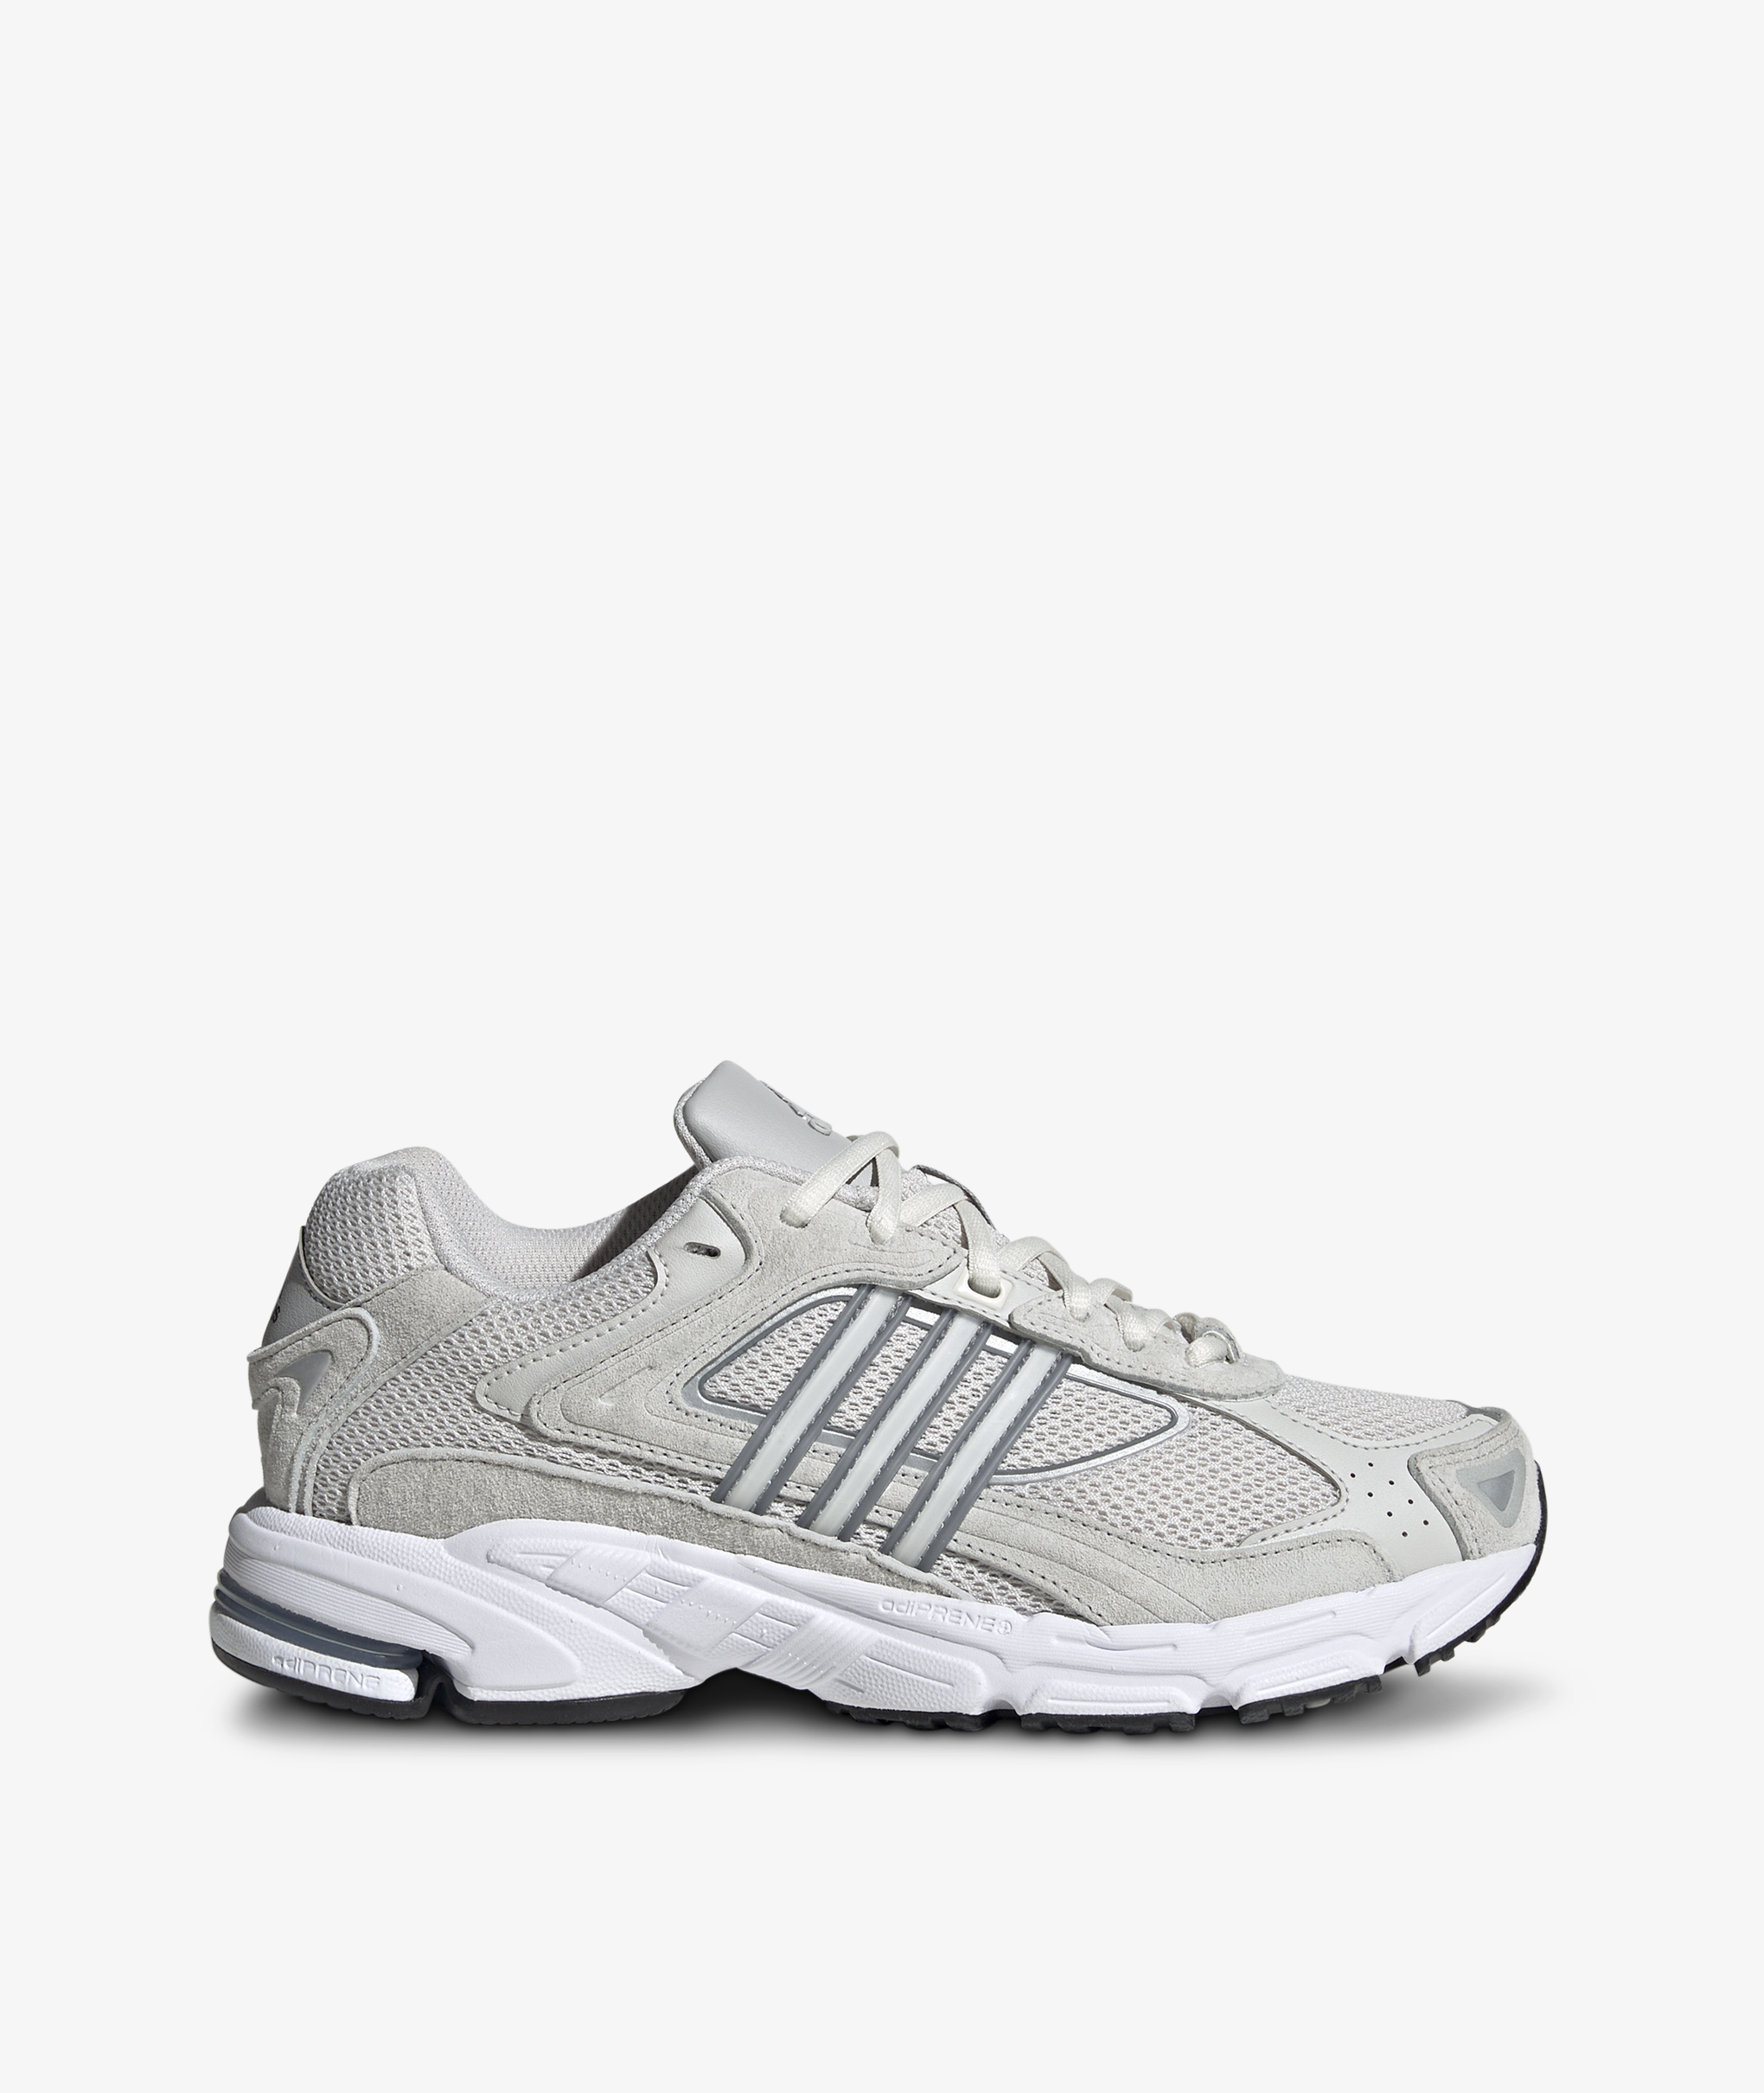 Norse Store | Shipping Worldwide - adidas Originals RESPONSE CL W